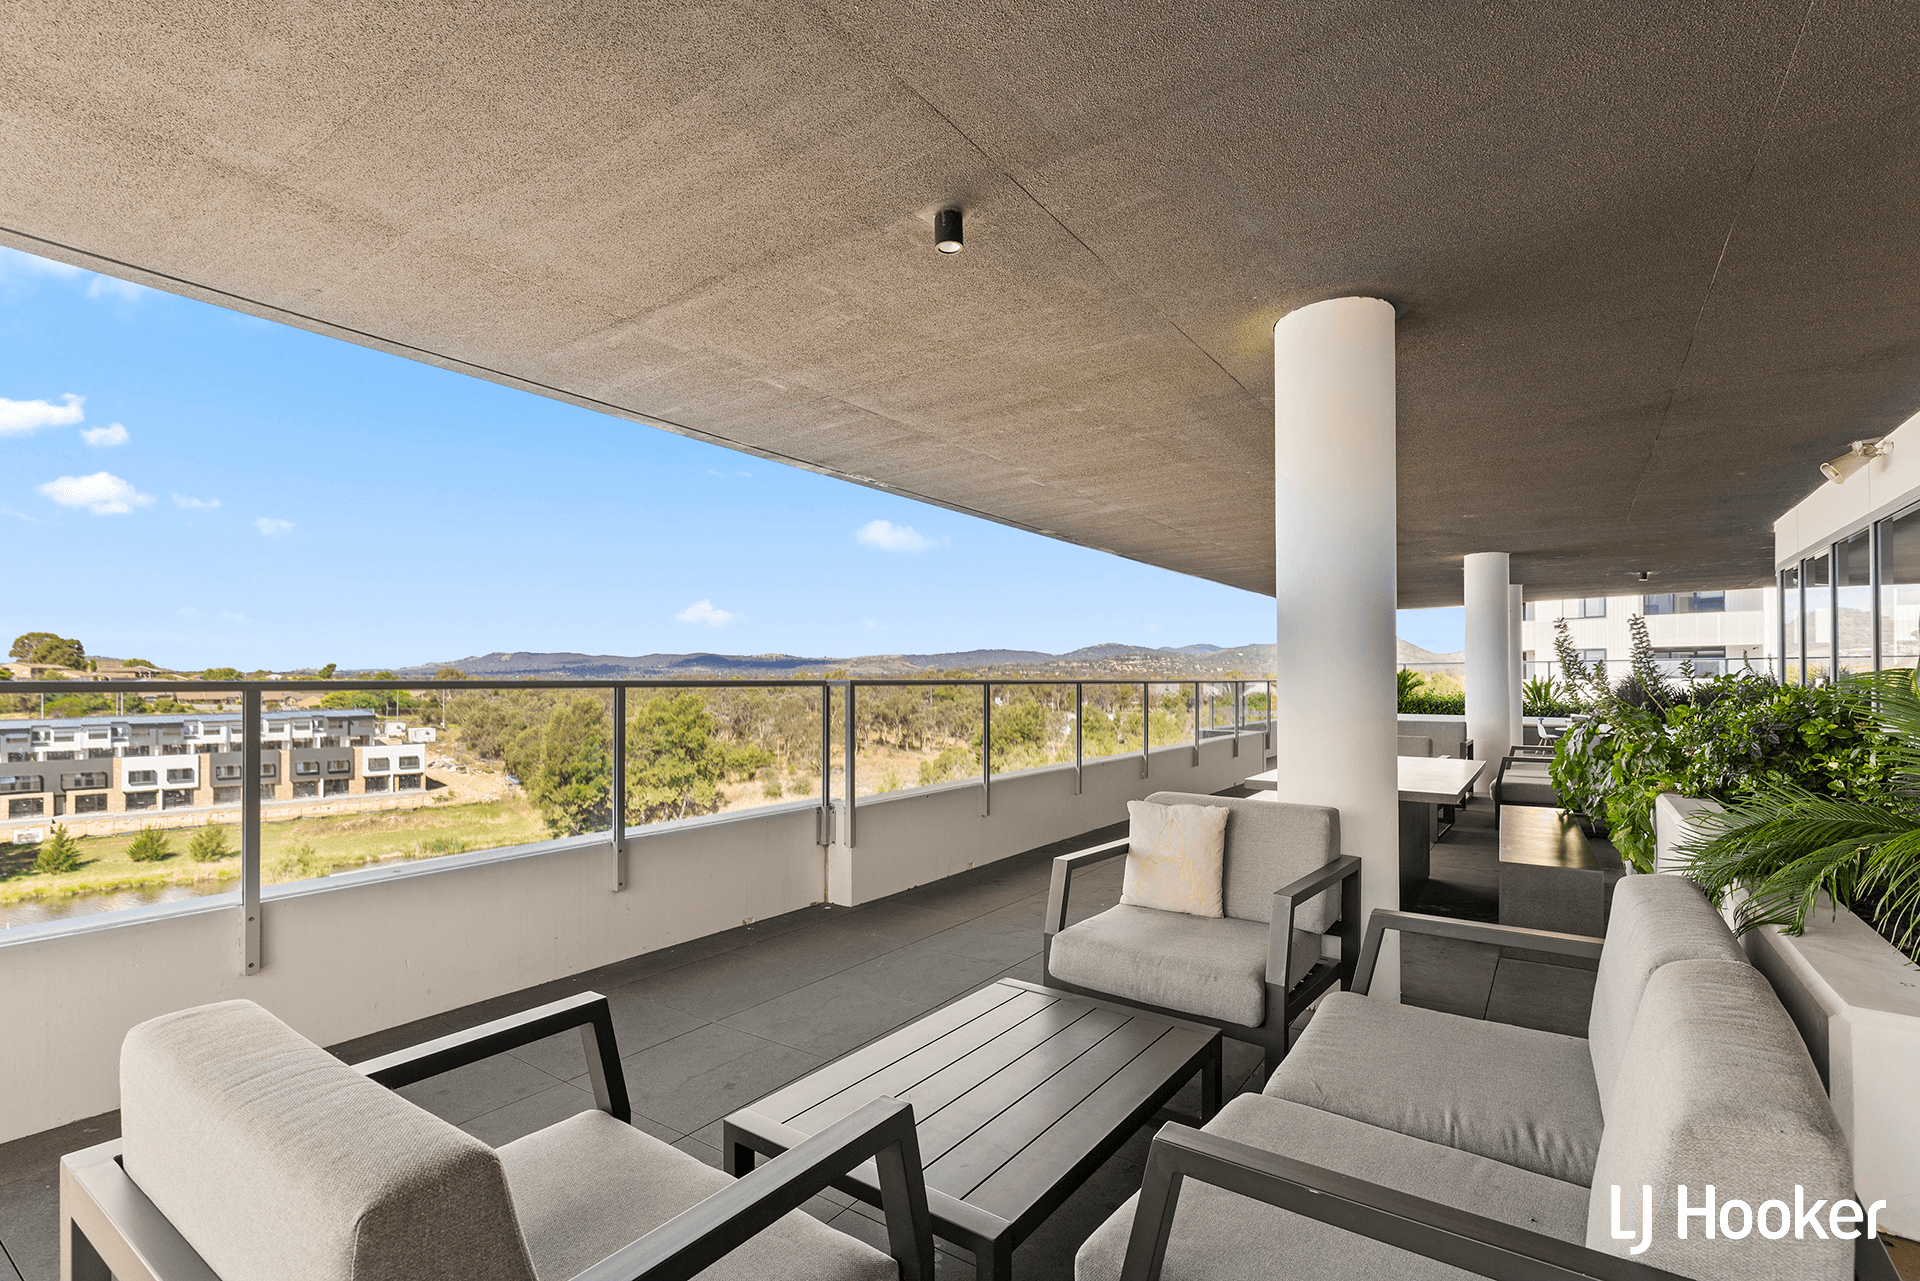 308/325 Anketell Street, GREENWAY, ACT 2900